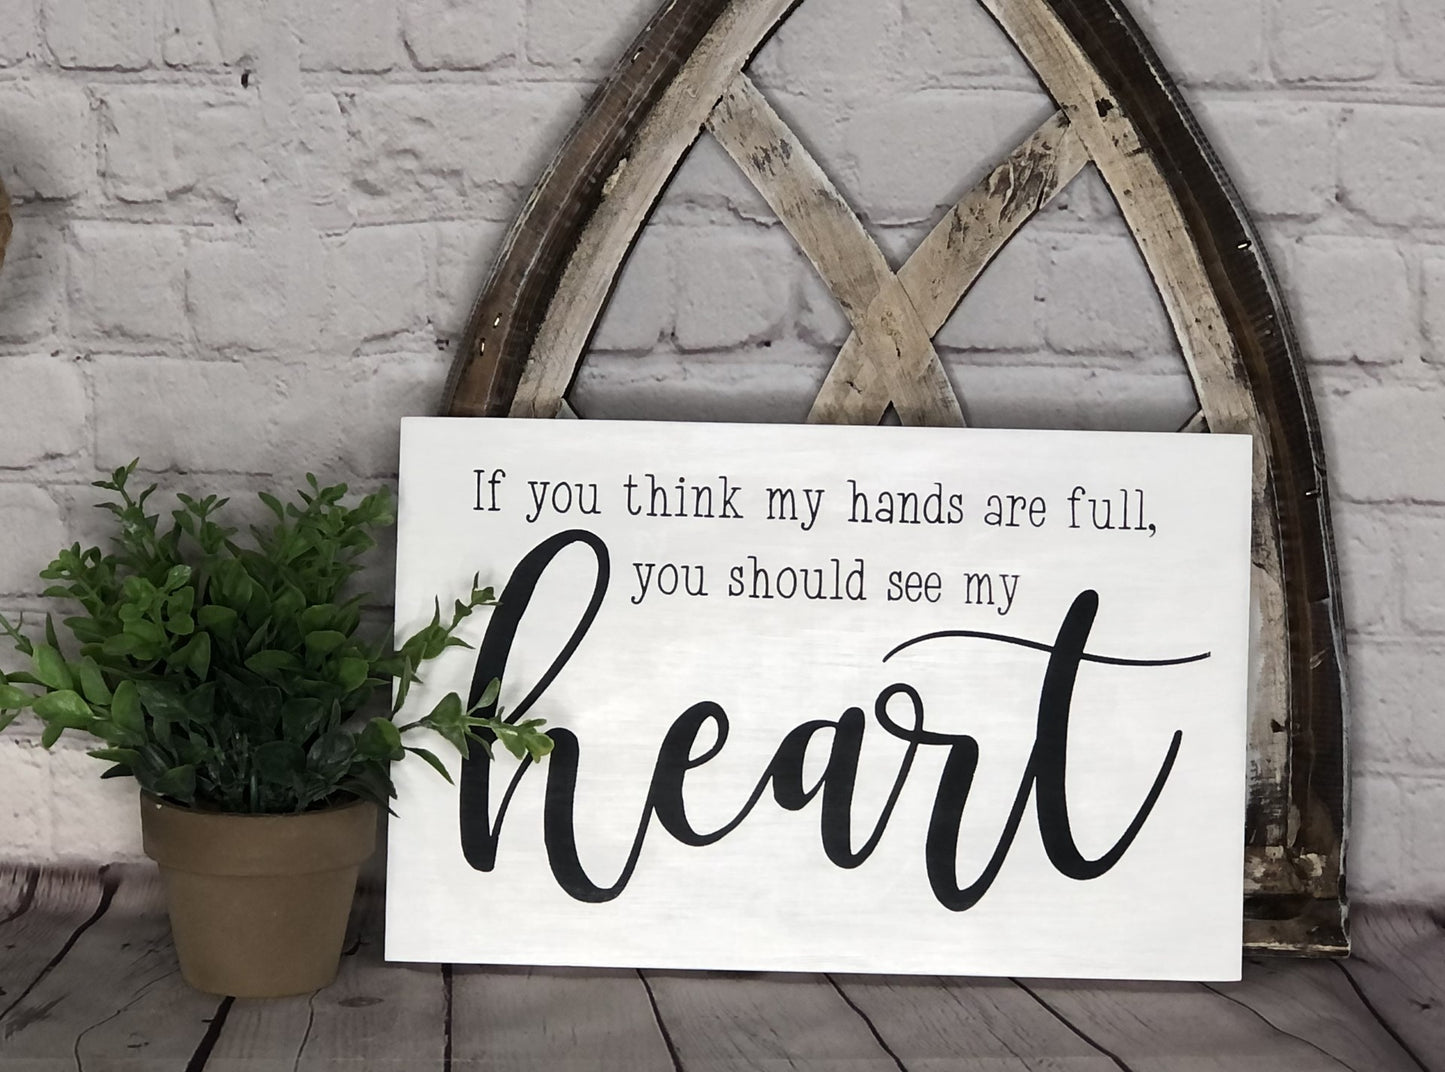 IF YOU THINK MY HANDS ARE FULL YOU SHOULD SEE MY HEART- WOOD SIGN